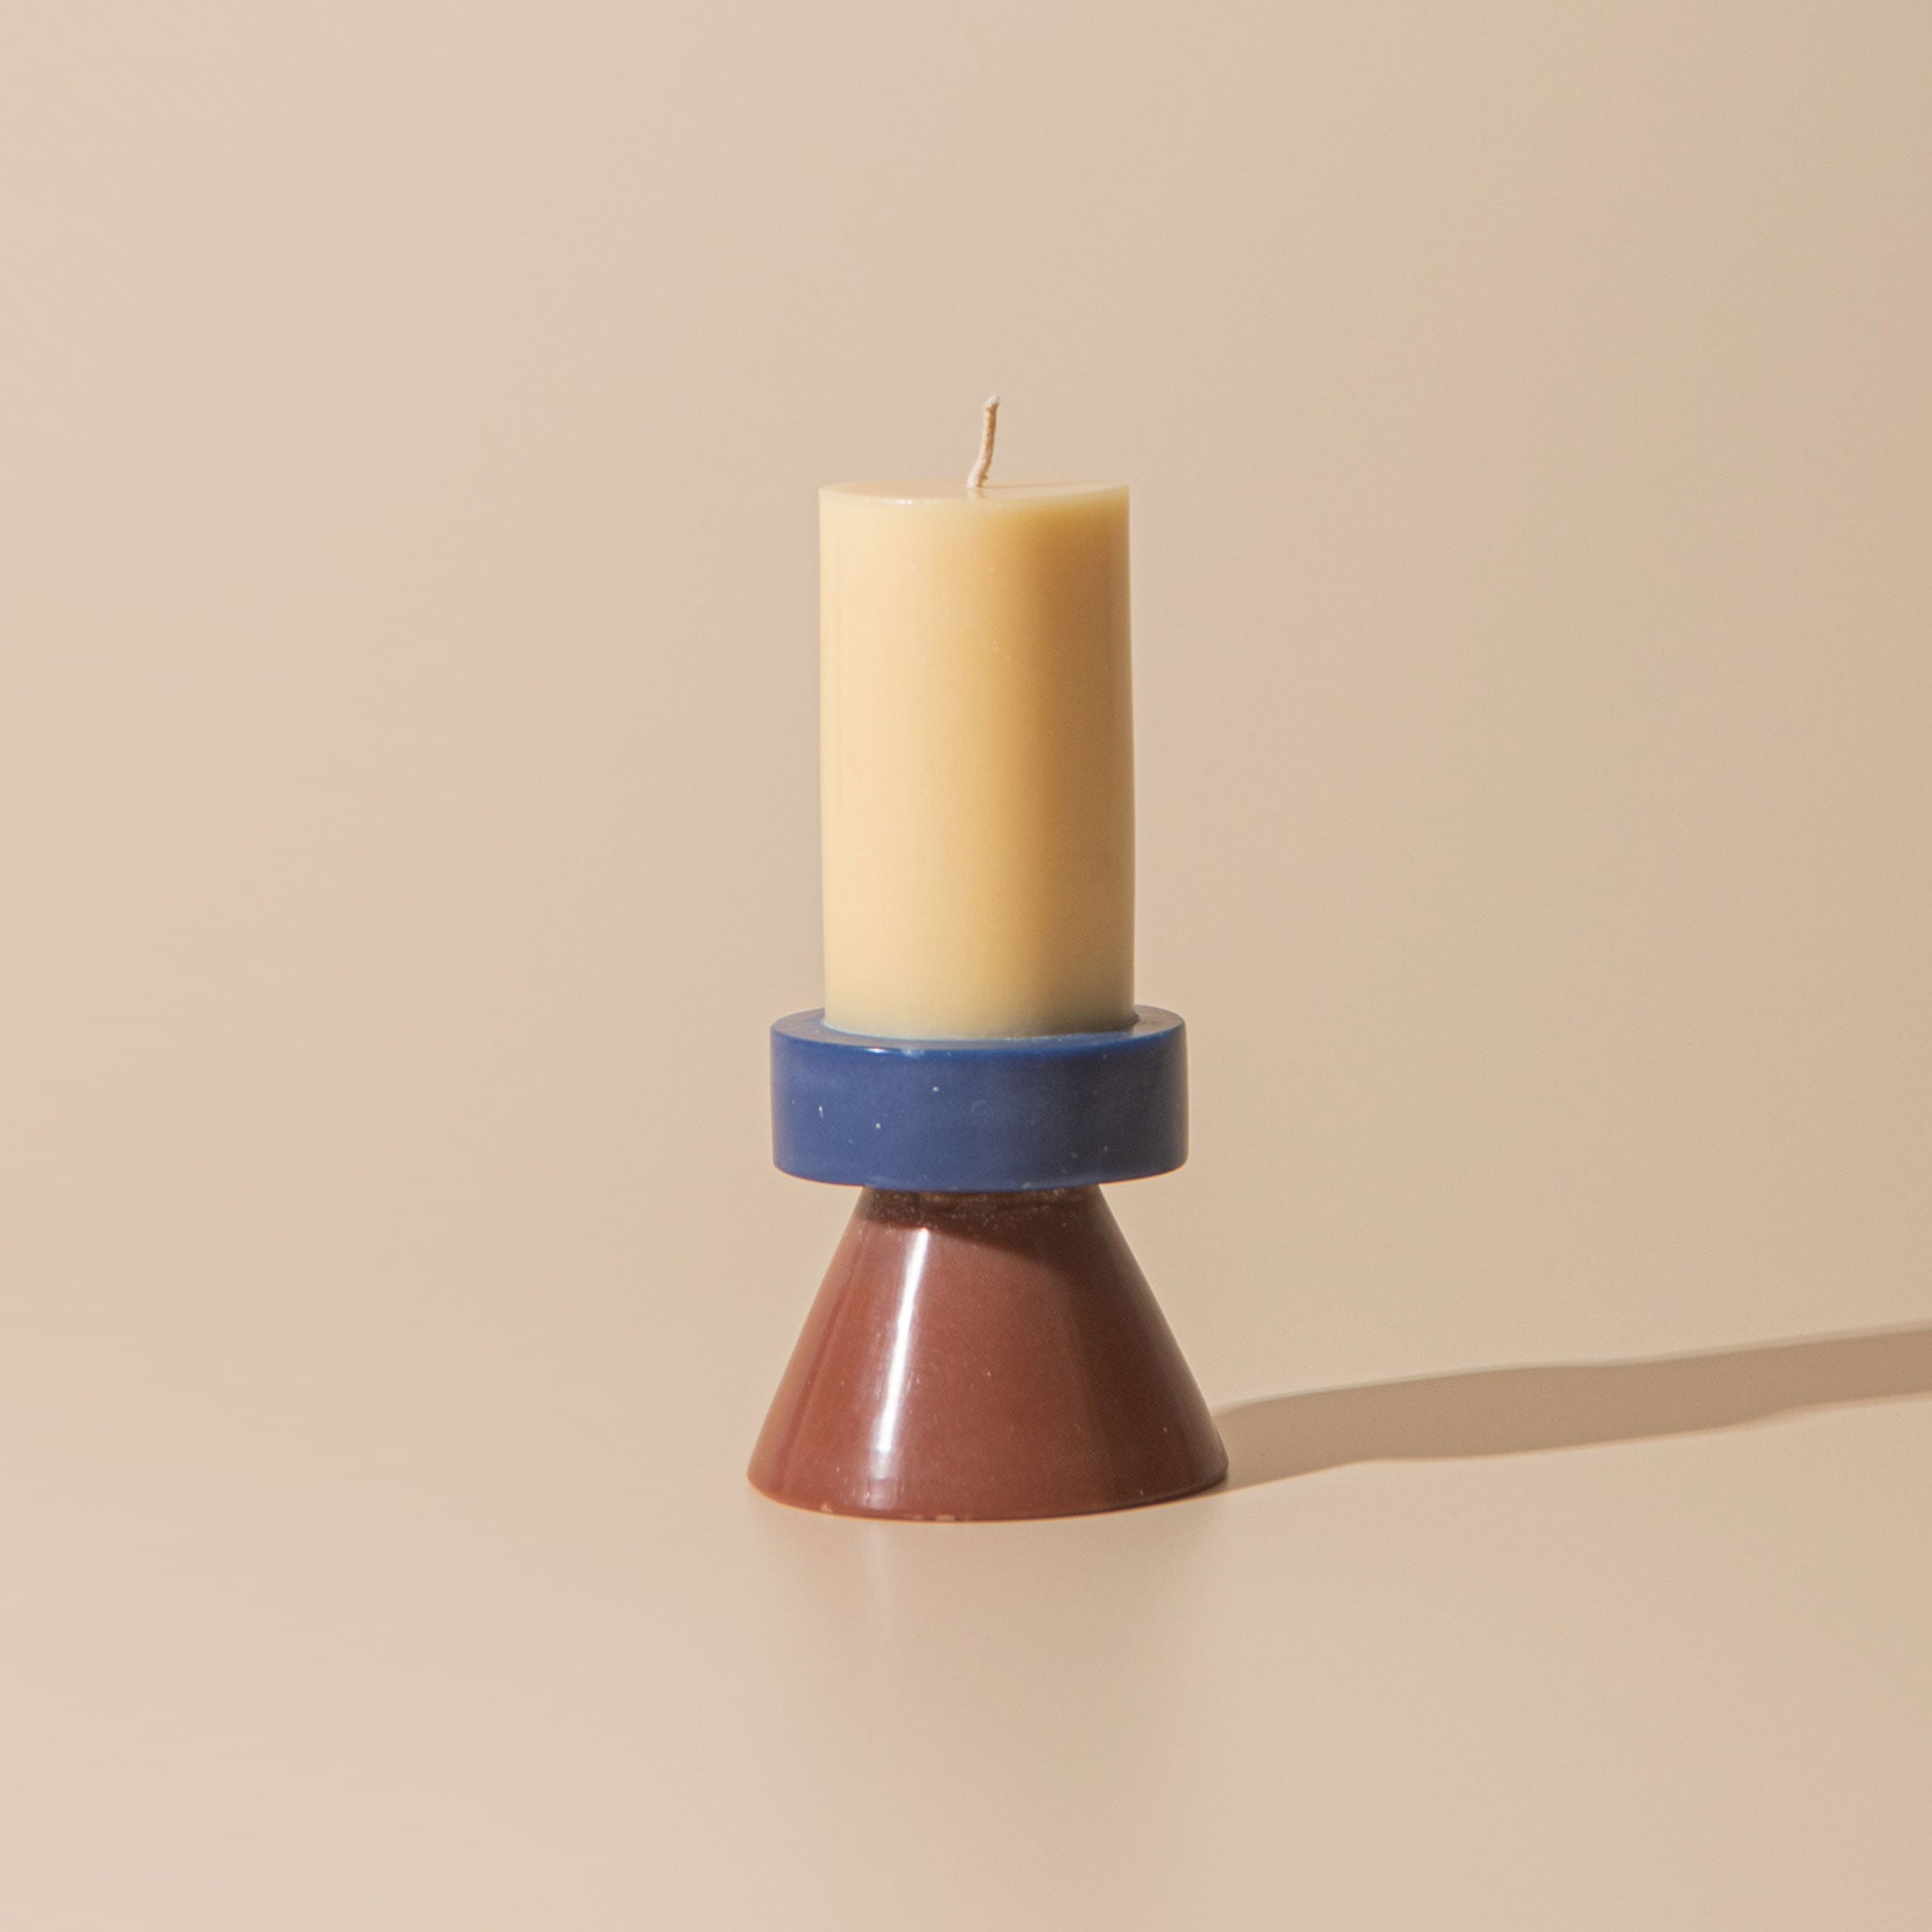 STACK CANDLE TALL | KERZE in Farben banana-navy-chocolate | 30 Std. Brenndauer | YOD AND CO